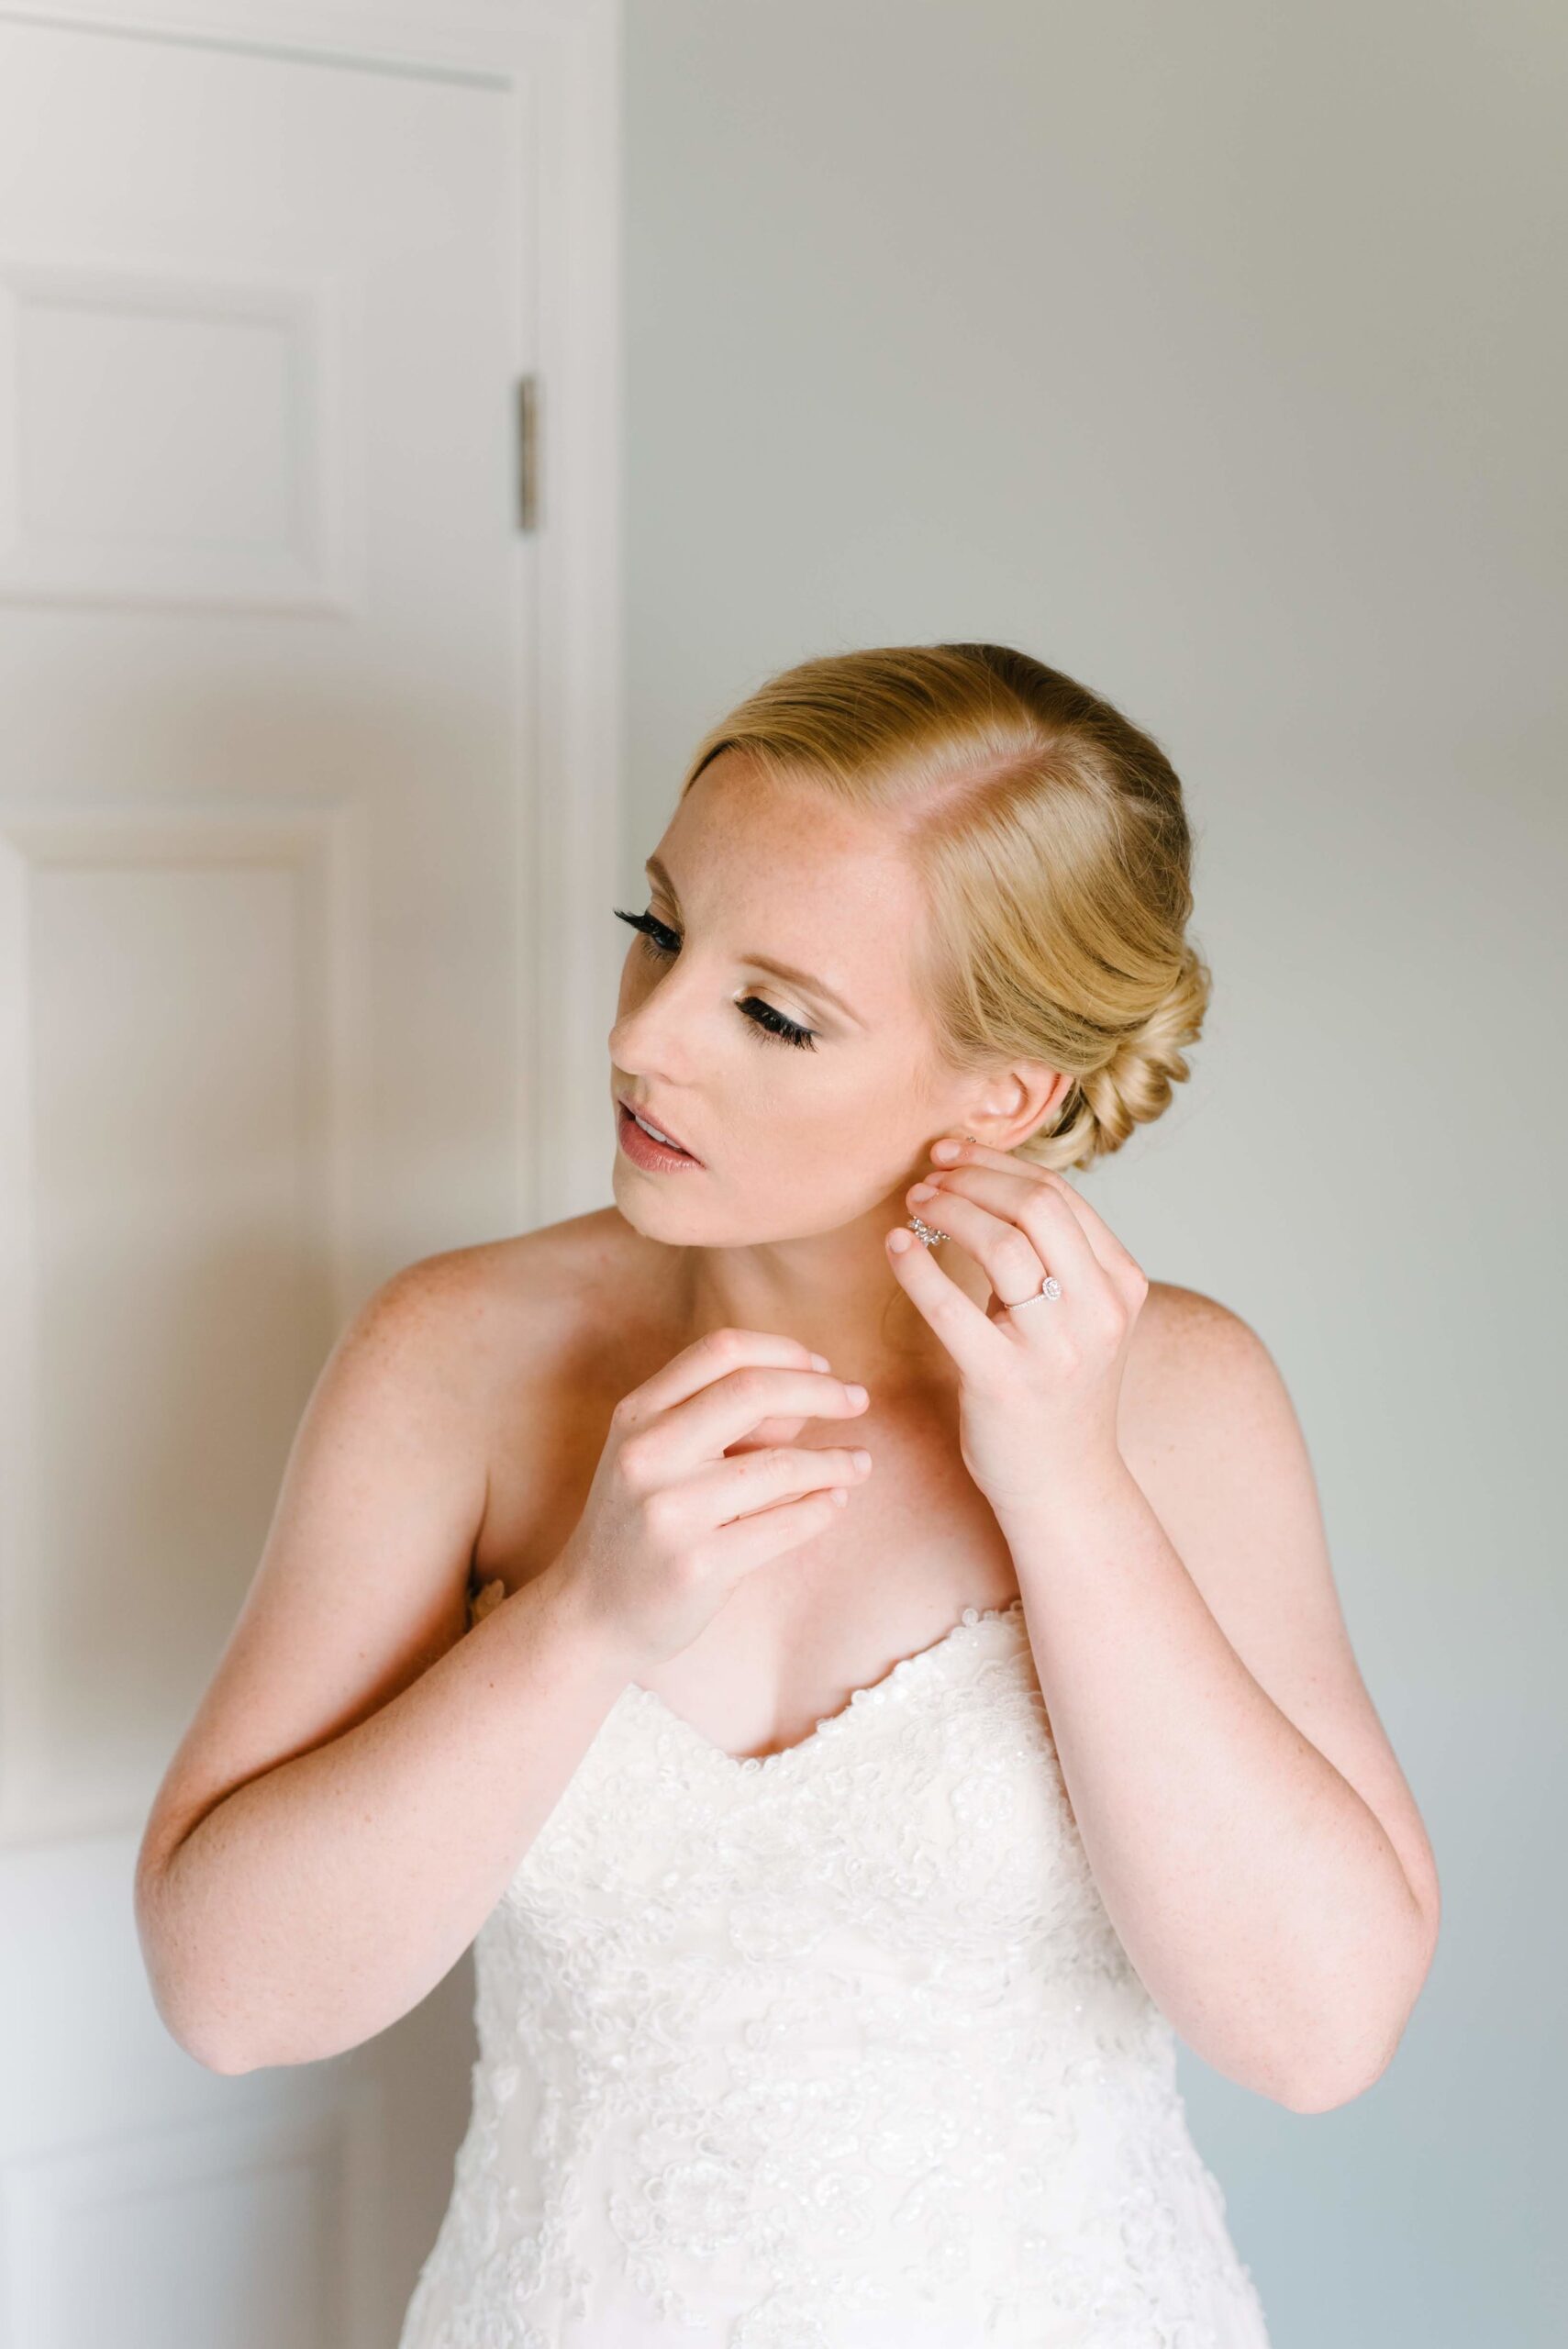 Our stunning bride had such an classic and natural look for her day courtesy of Alissa Walker Makeup and Vesper Hair Studio.